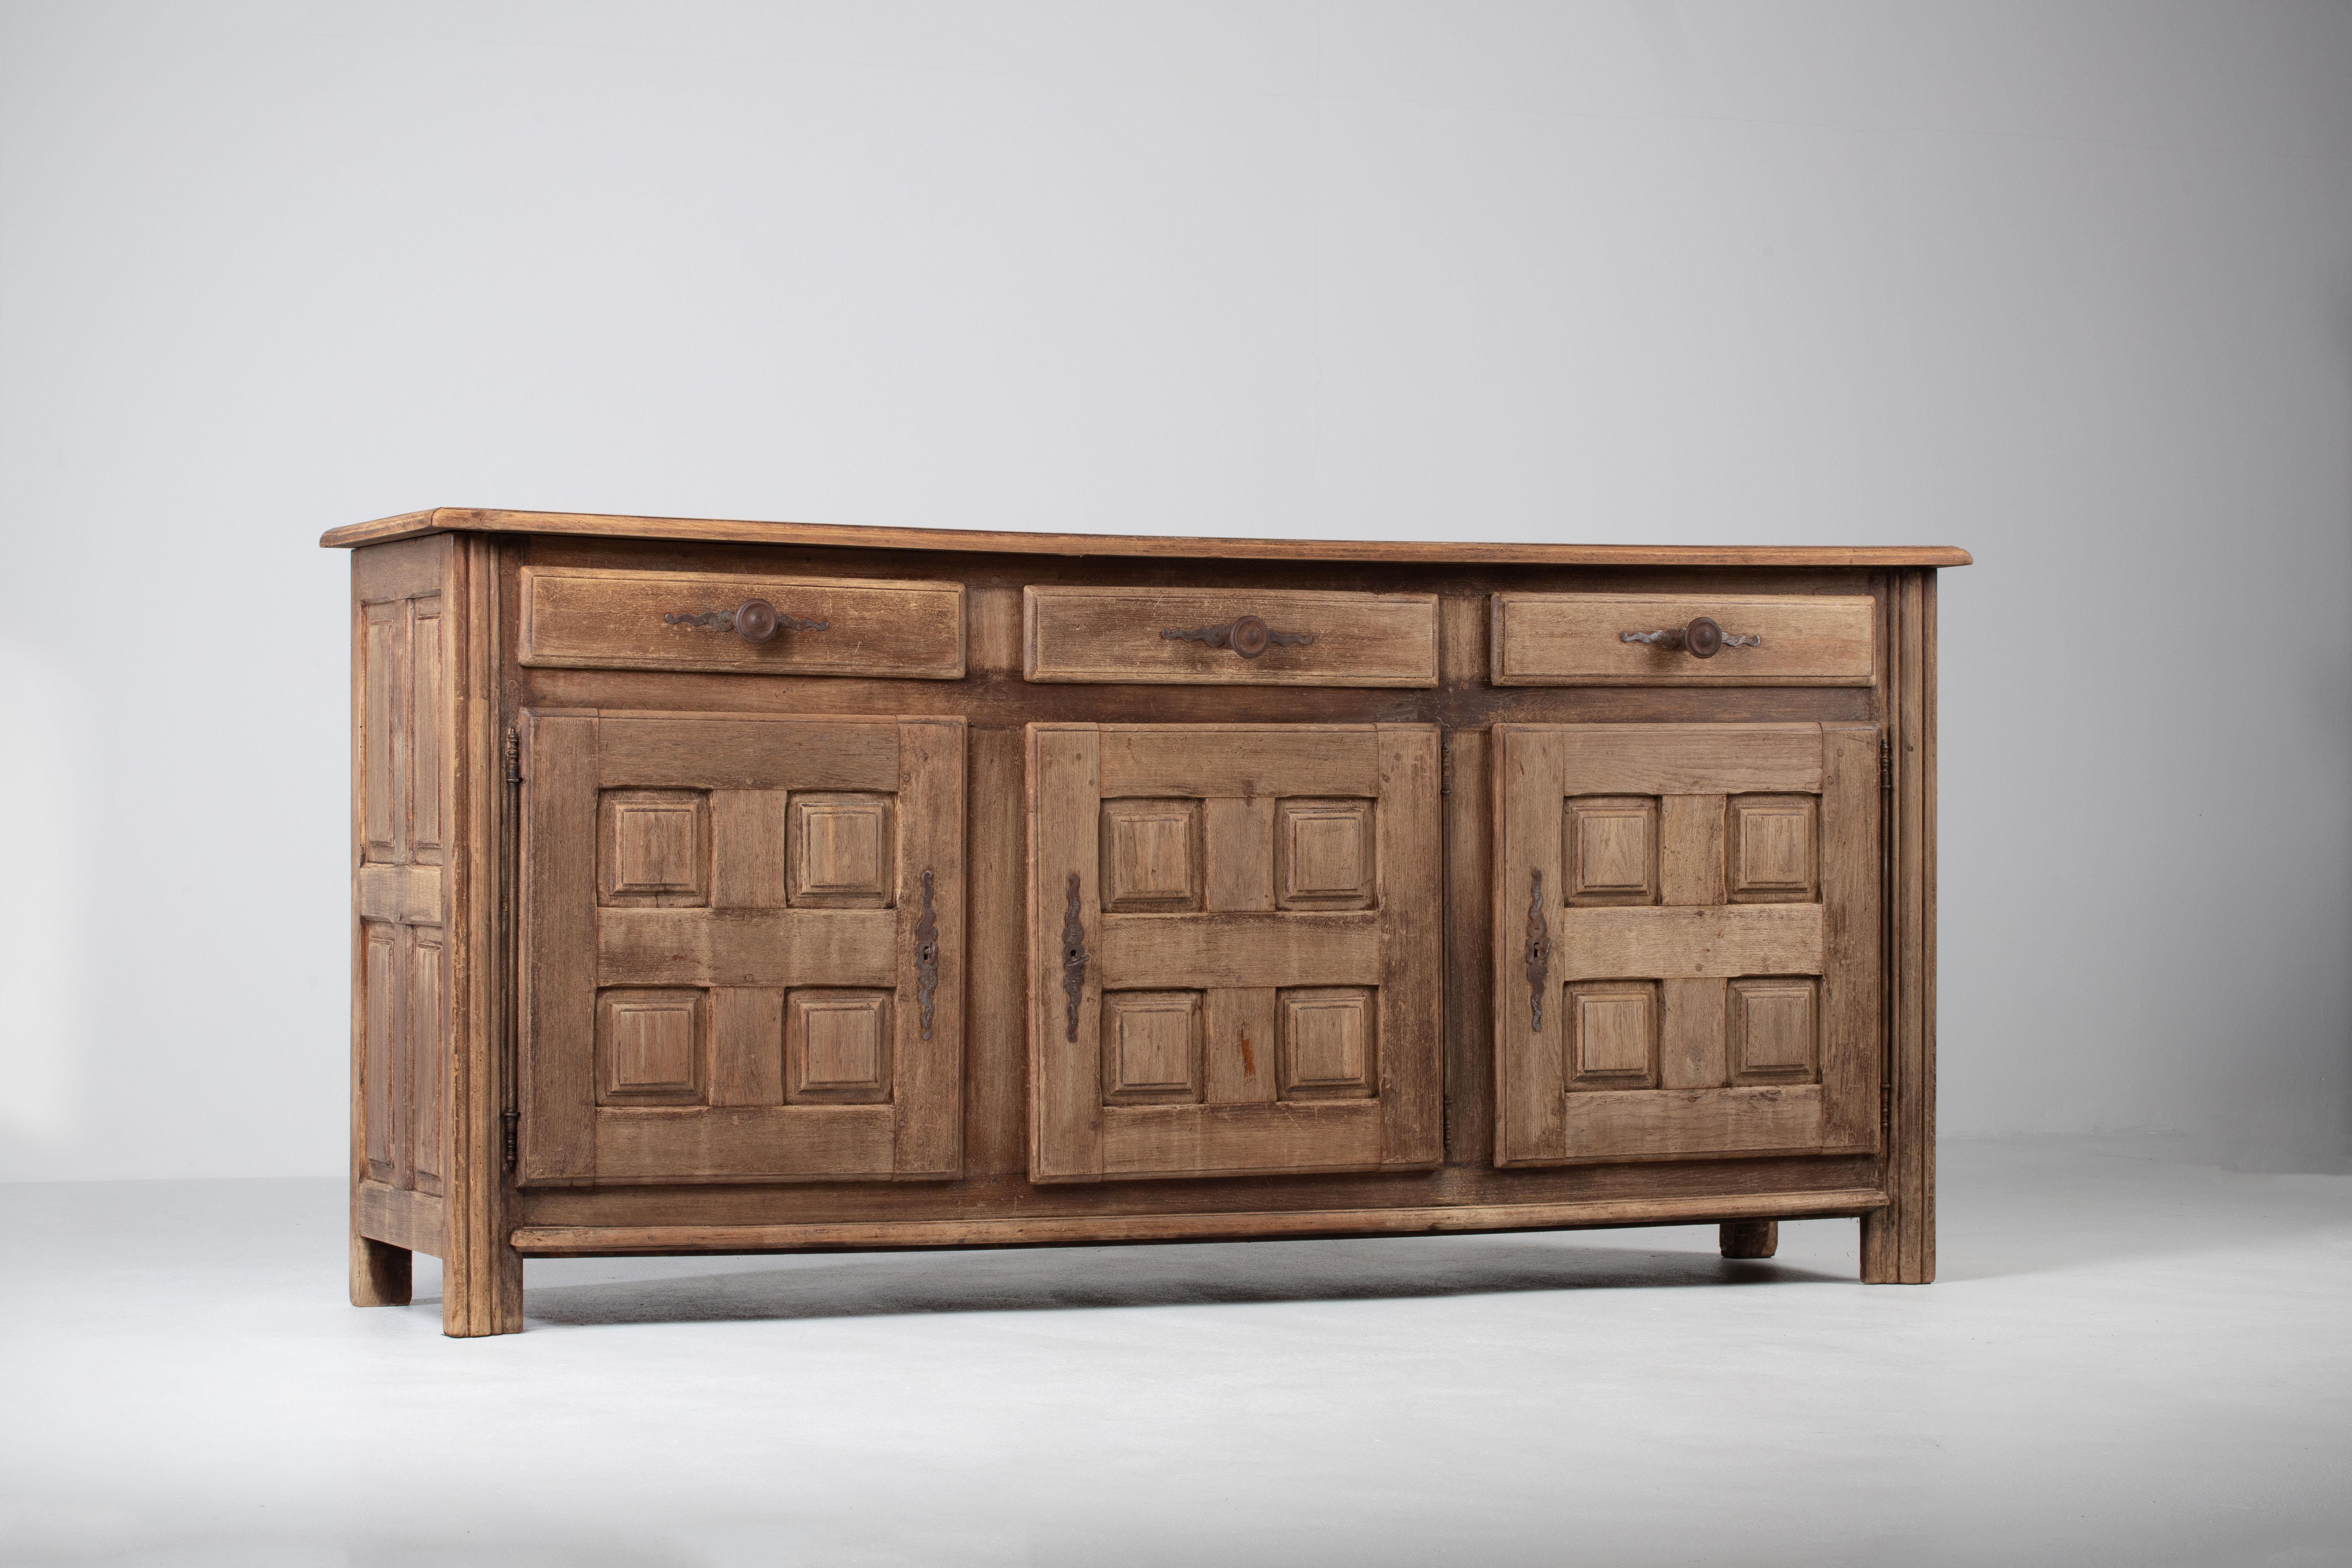 Bleached solid oak credenza, France, 1940s.
Large mid-century Brutalist sideboard. 
The credenza consists of three central storage facilities and covered with very detailed designed doors. 

